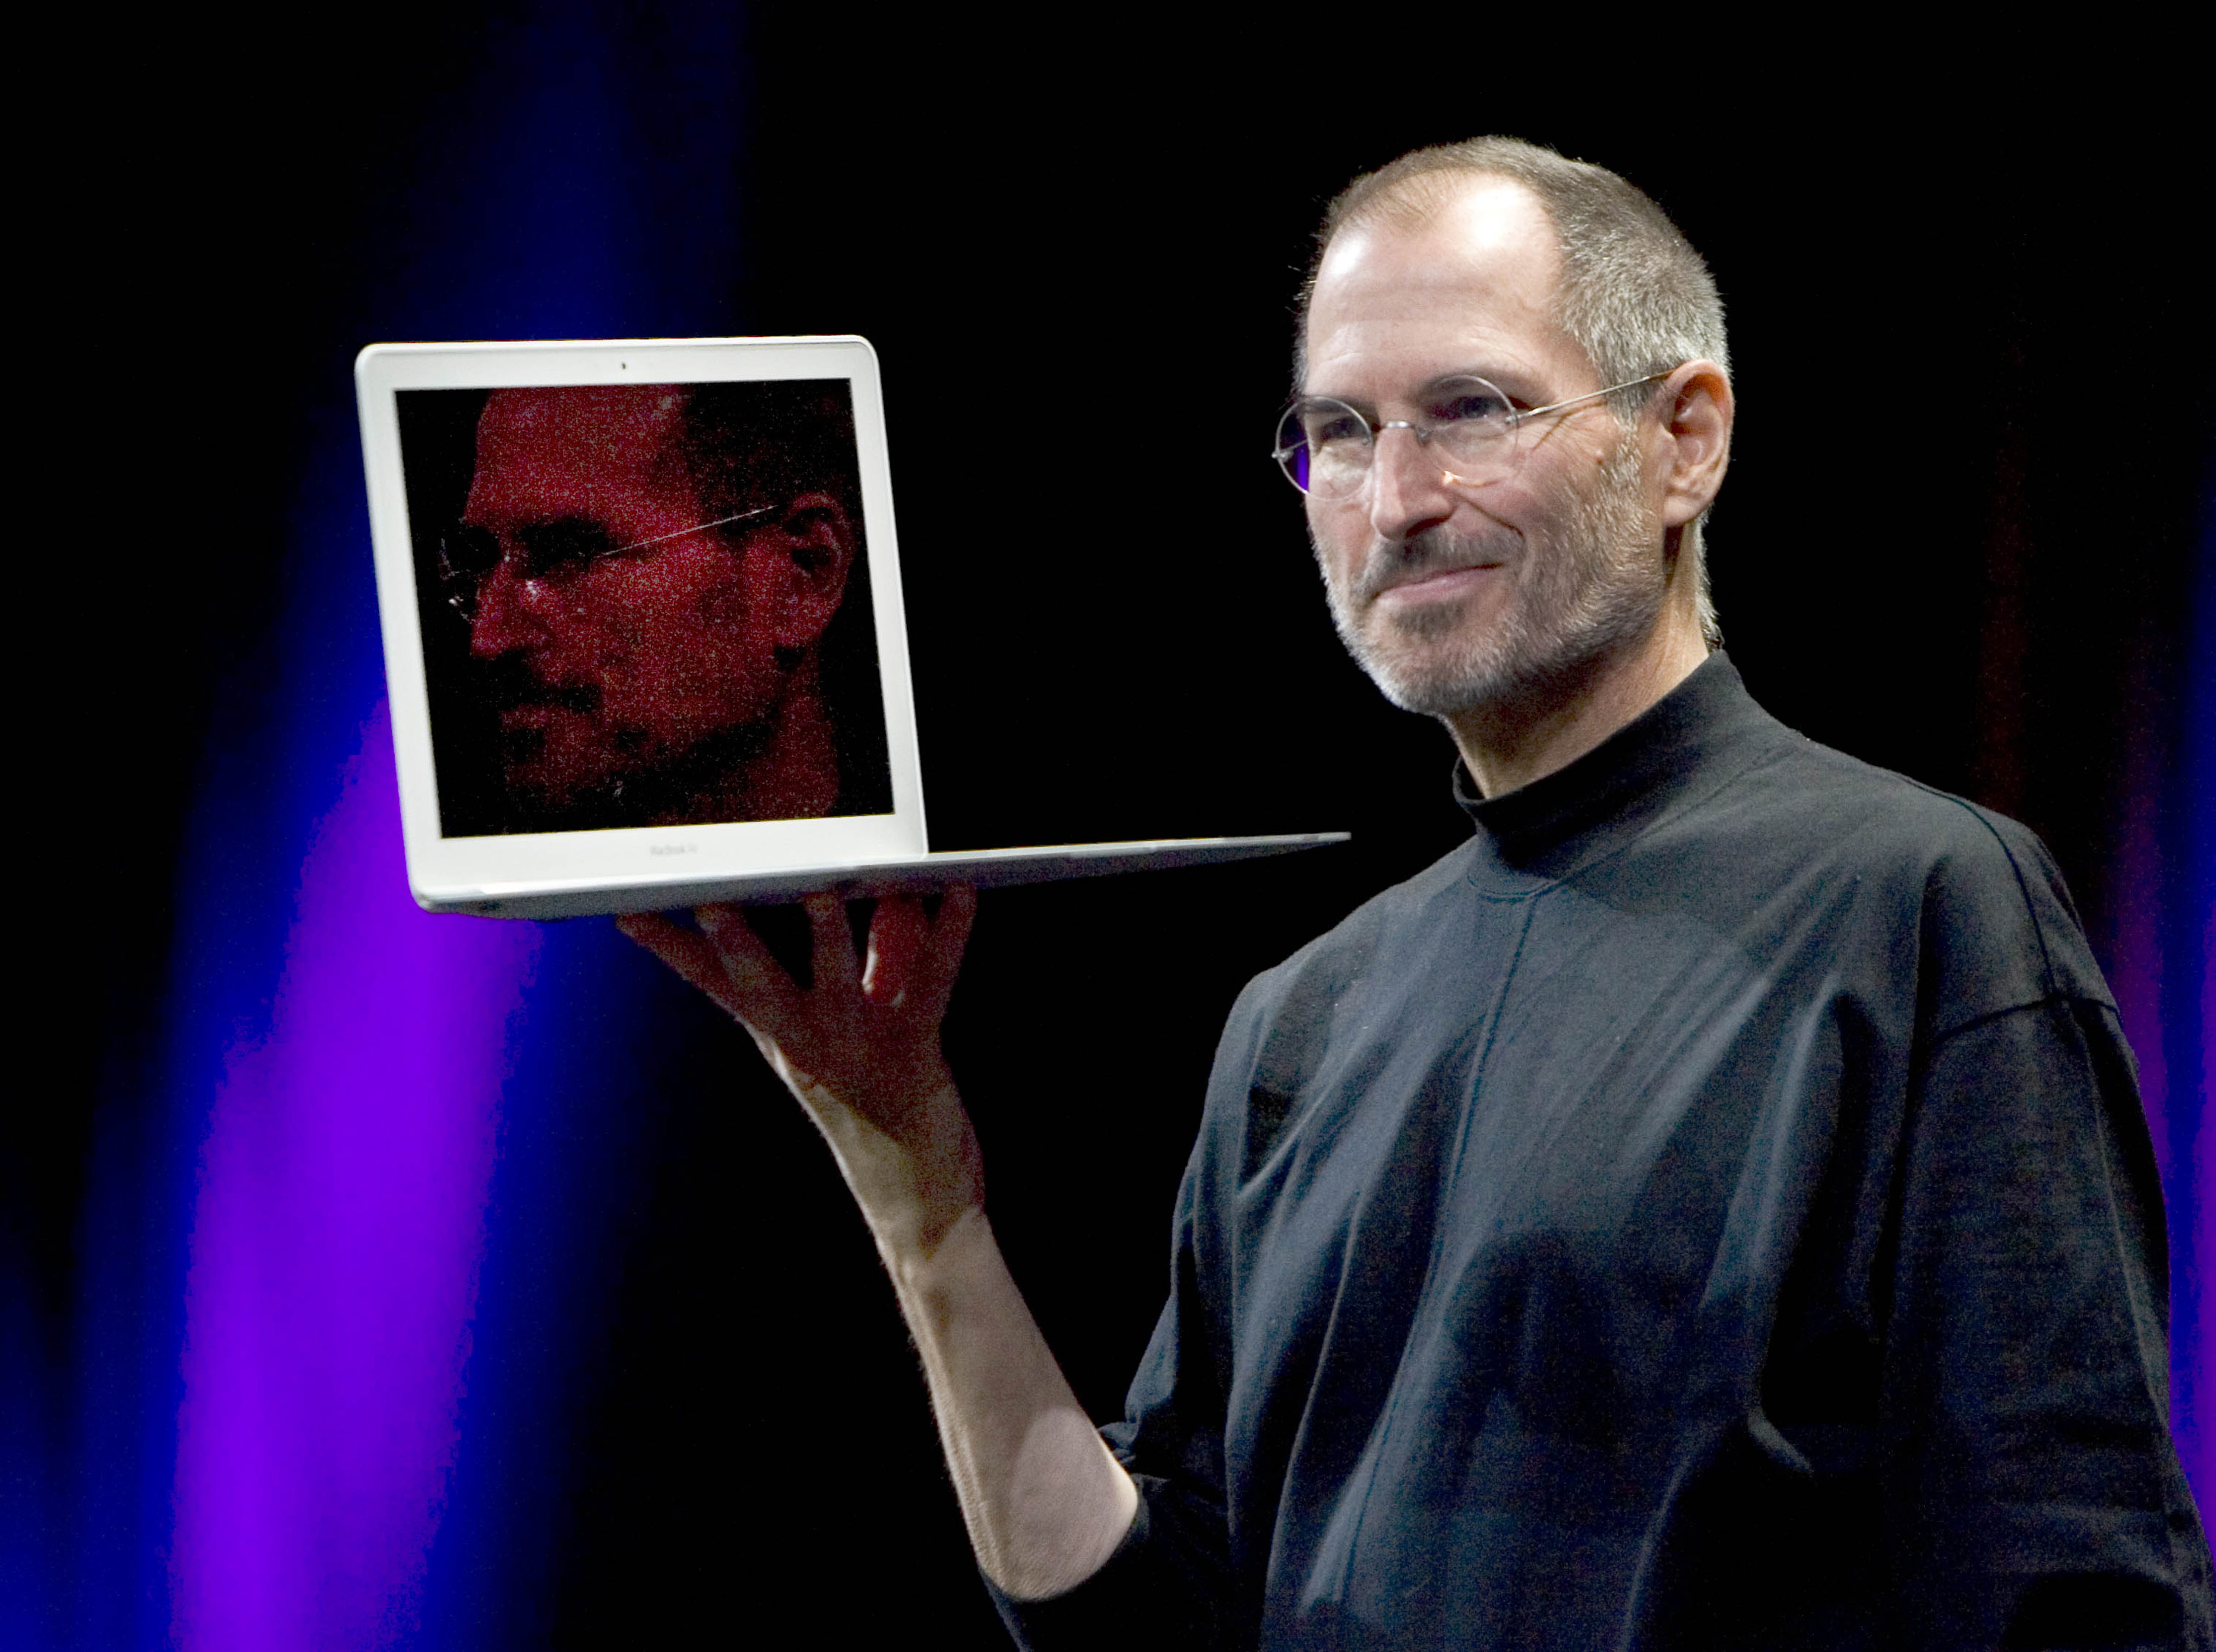 Apple co-founder Steve Jobs, seen in this file photo from January 15, 2008 while holding up the MacBook Air, right, has died. Jobs was 56. (Robert Durell/Los Angeles Times/MCT)